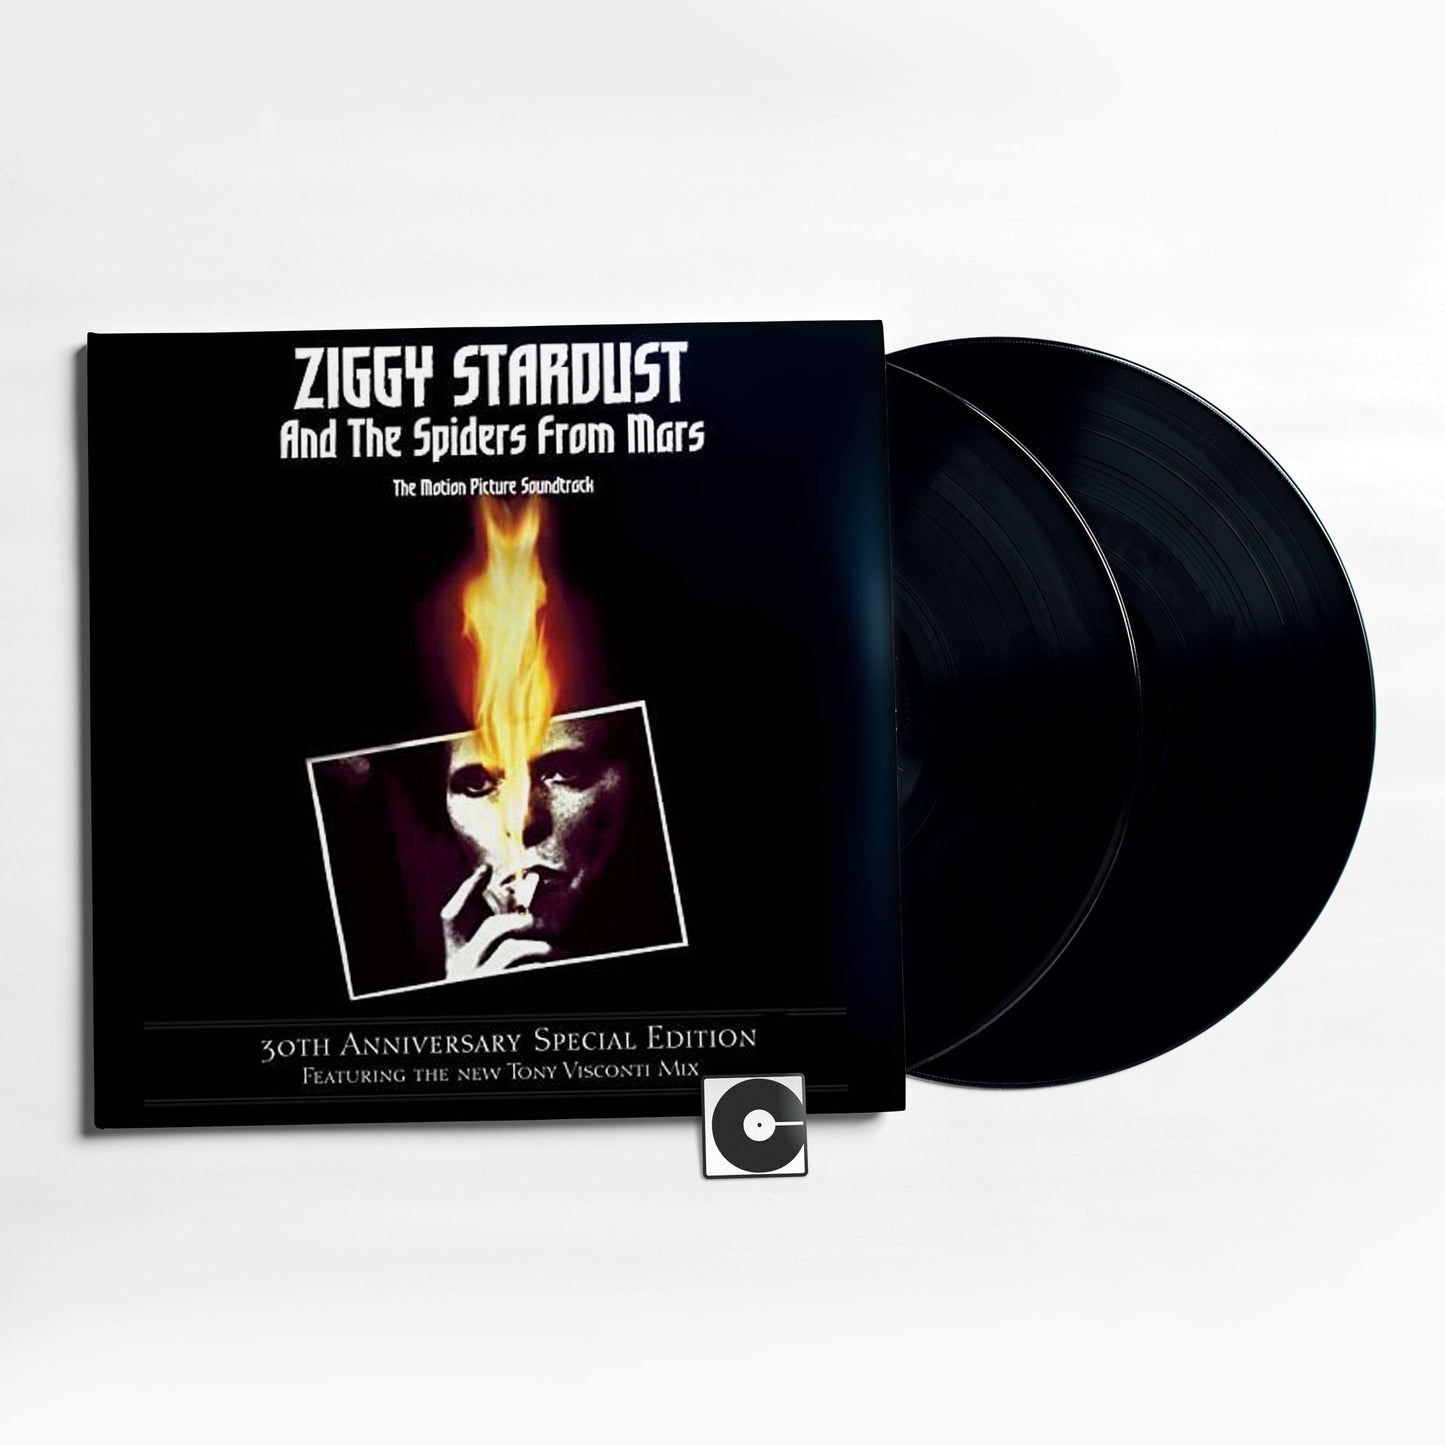 David Bowie - "Ziggy Stardust And The Spiders From Mars Motion Picture Soundtrack"